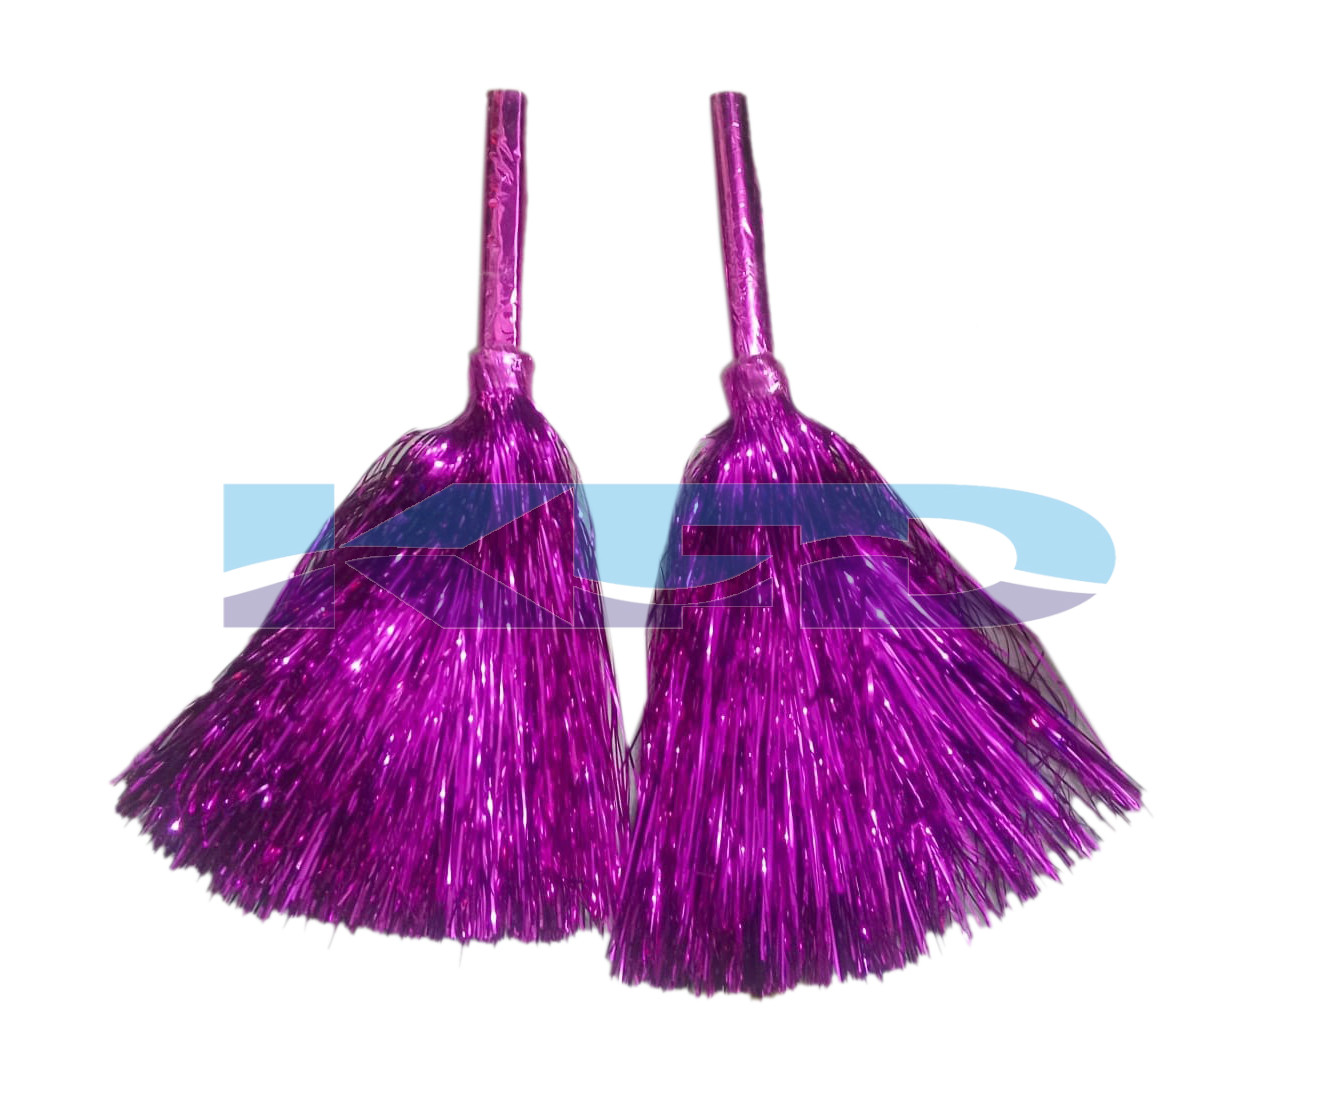 Pompom Cheerleading Pompom Use For Dance Party/School Annual Function/Special Event/Cricket Dance/Birthday Party